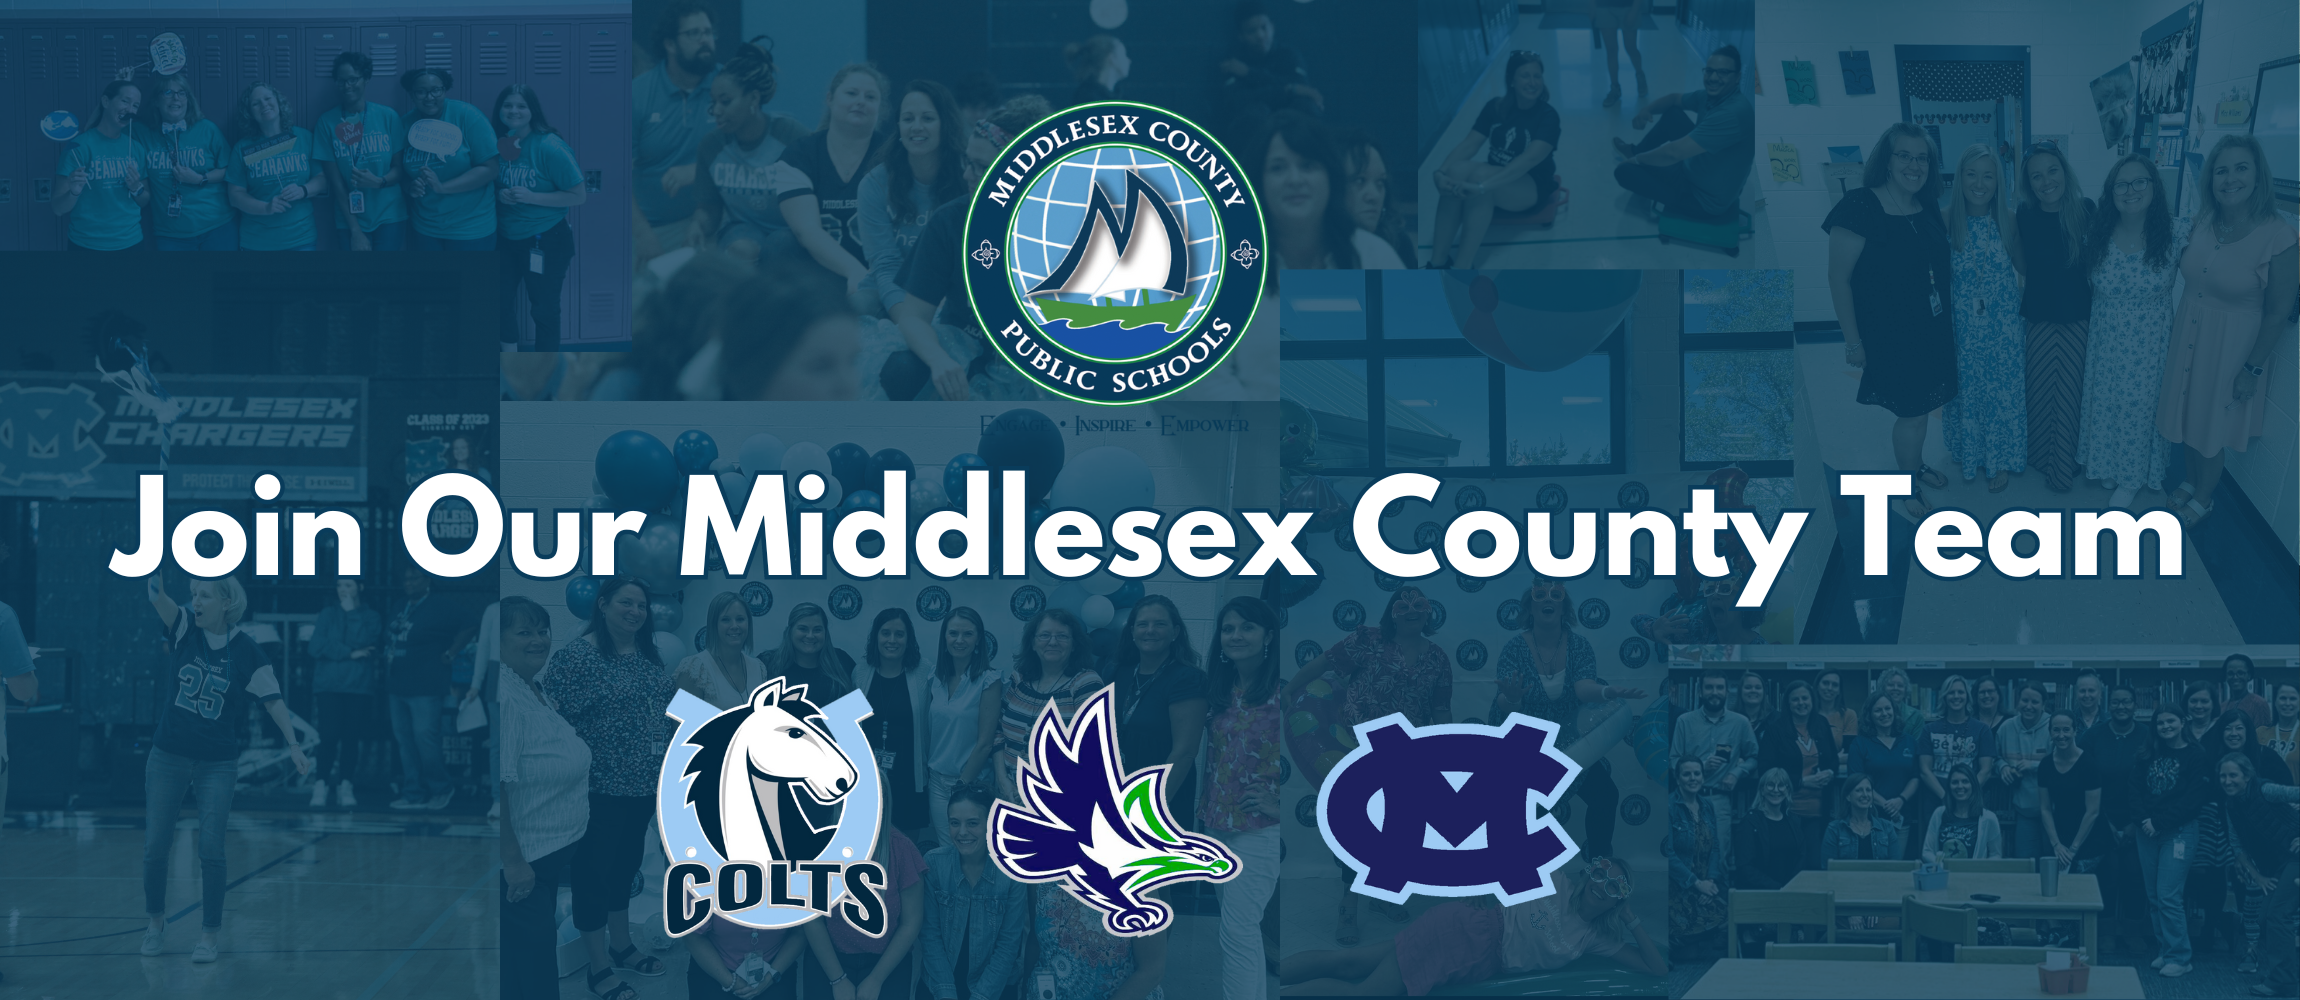 Join our Middlesex County Team